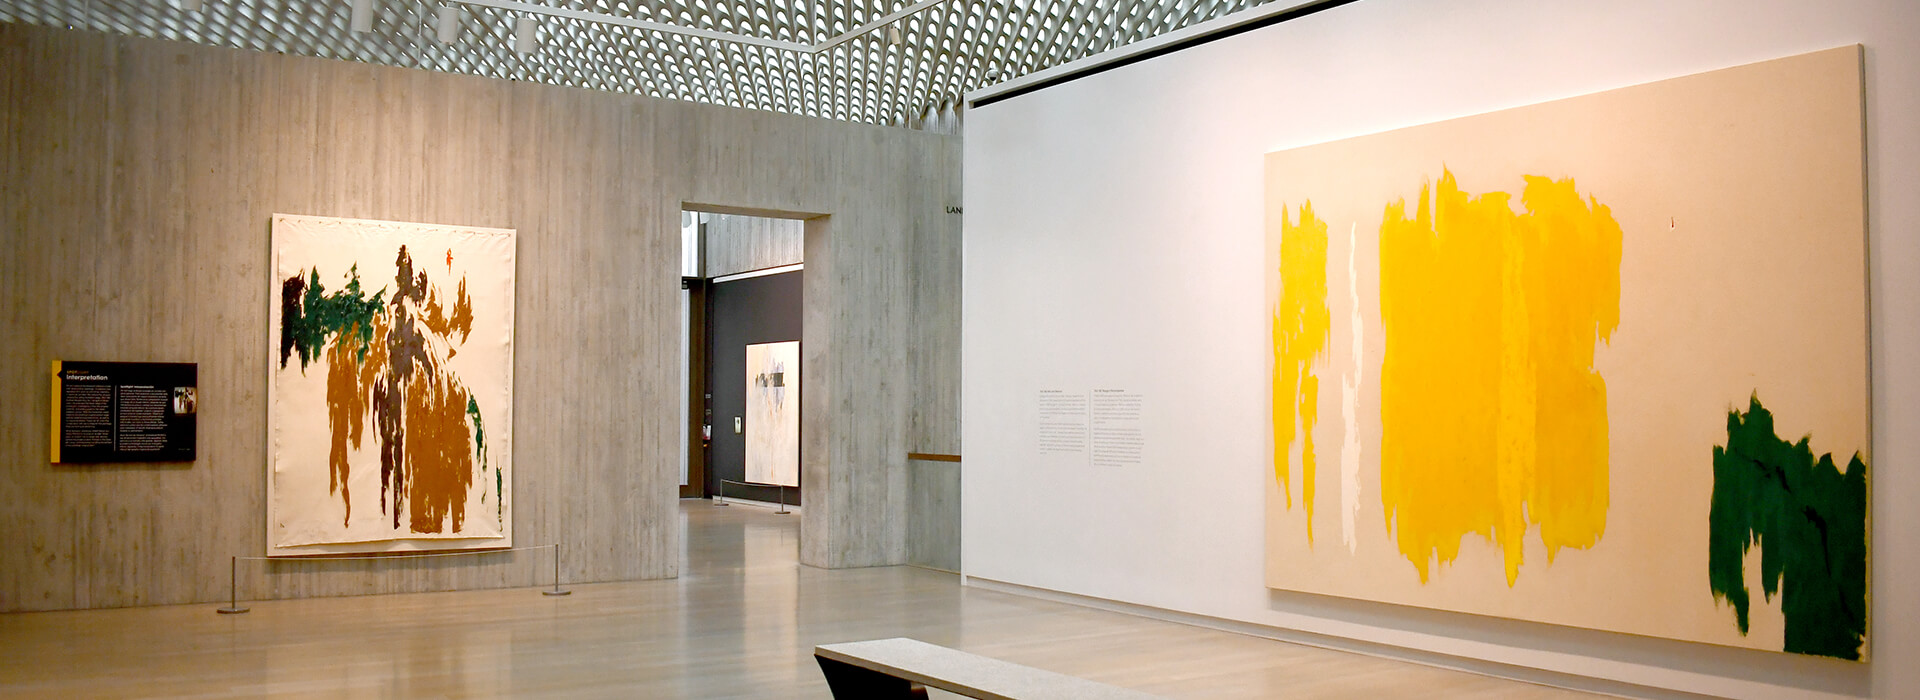 Installation image of a gallery at the Clyfford Still Museum